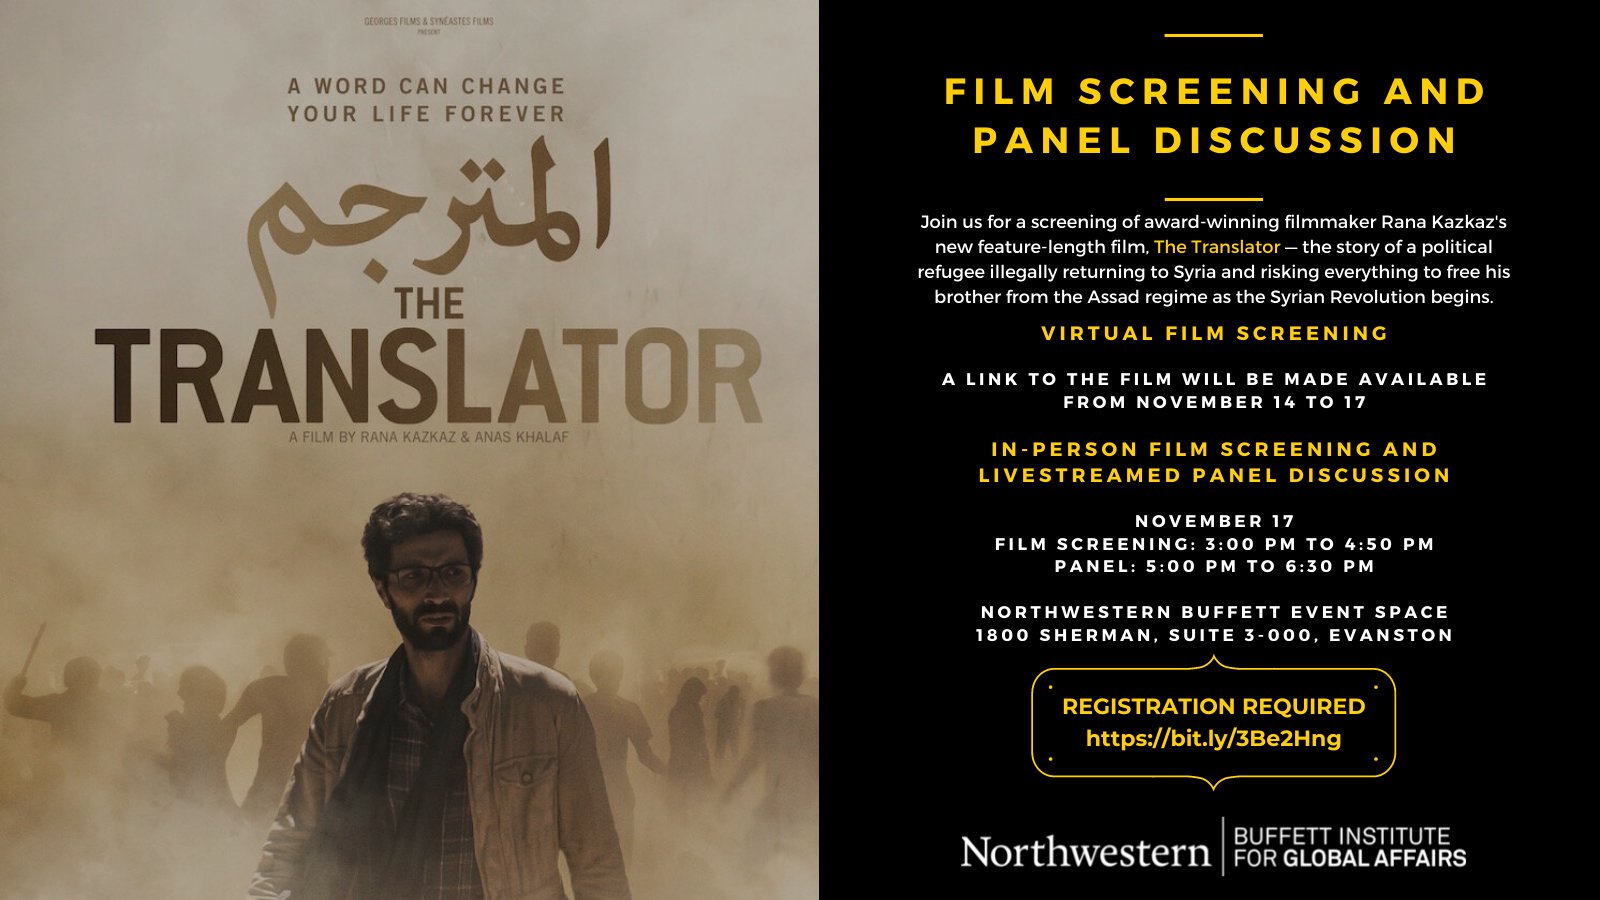 Professor Rana Kazkaz‘s latest film, The Translator, will be screened at an event hosted by the Buffett Institute for Global Affairs.